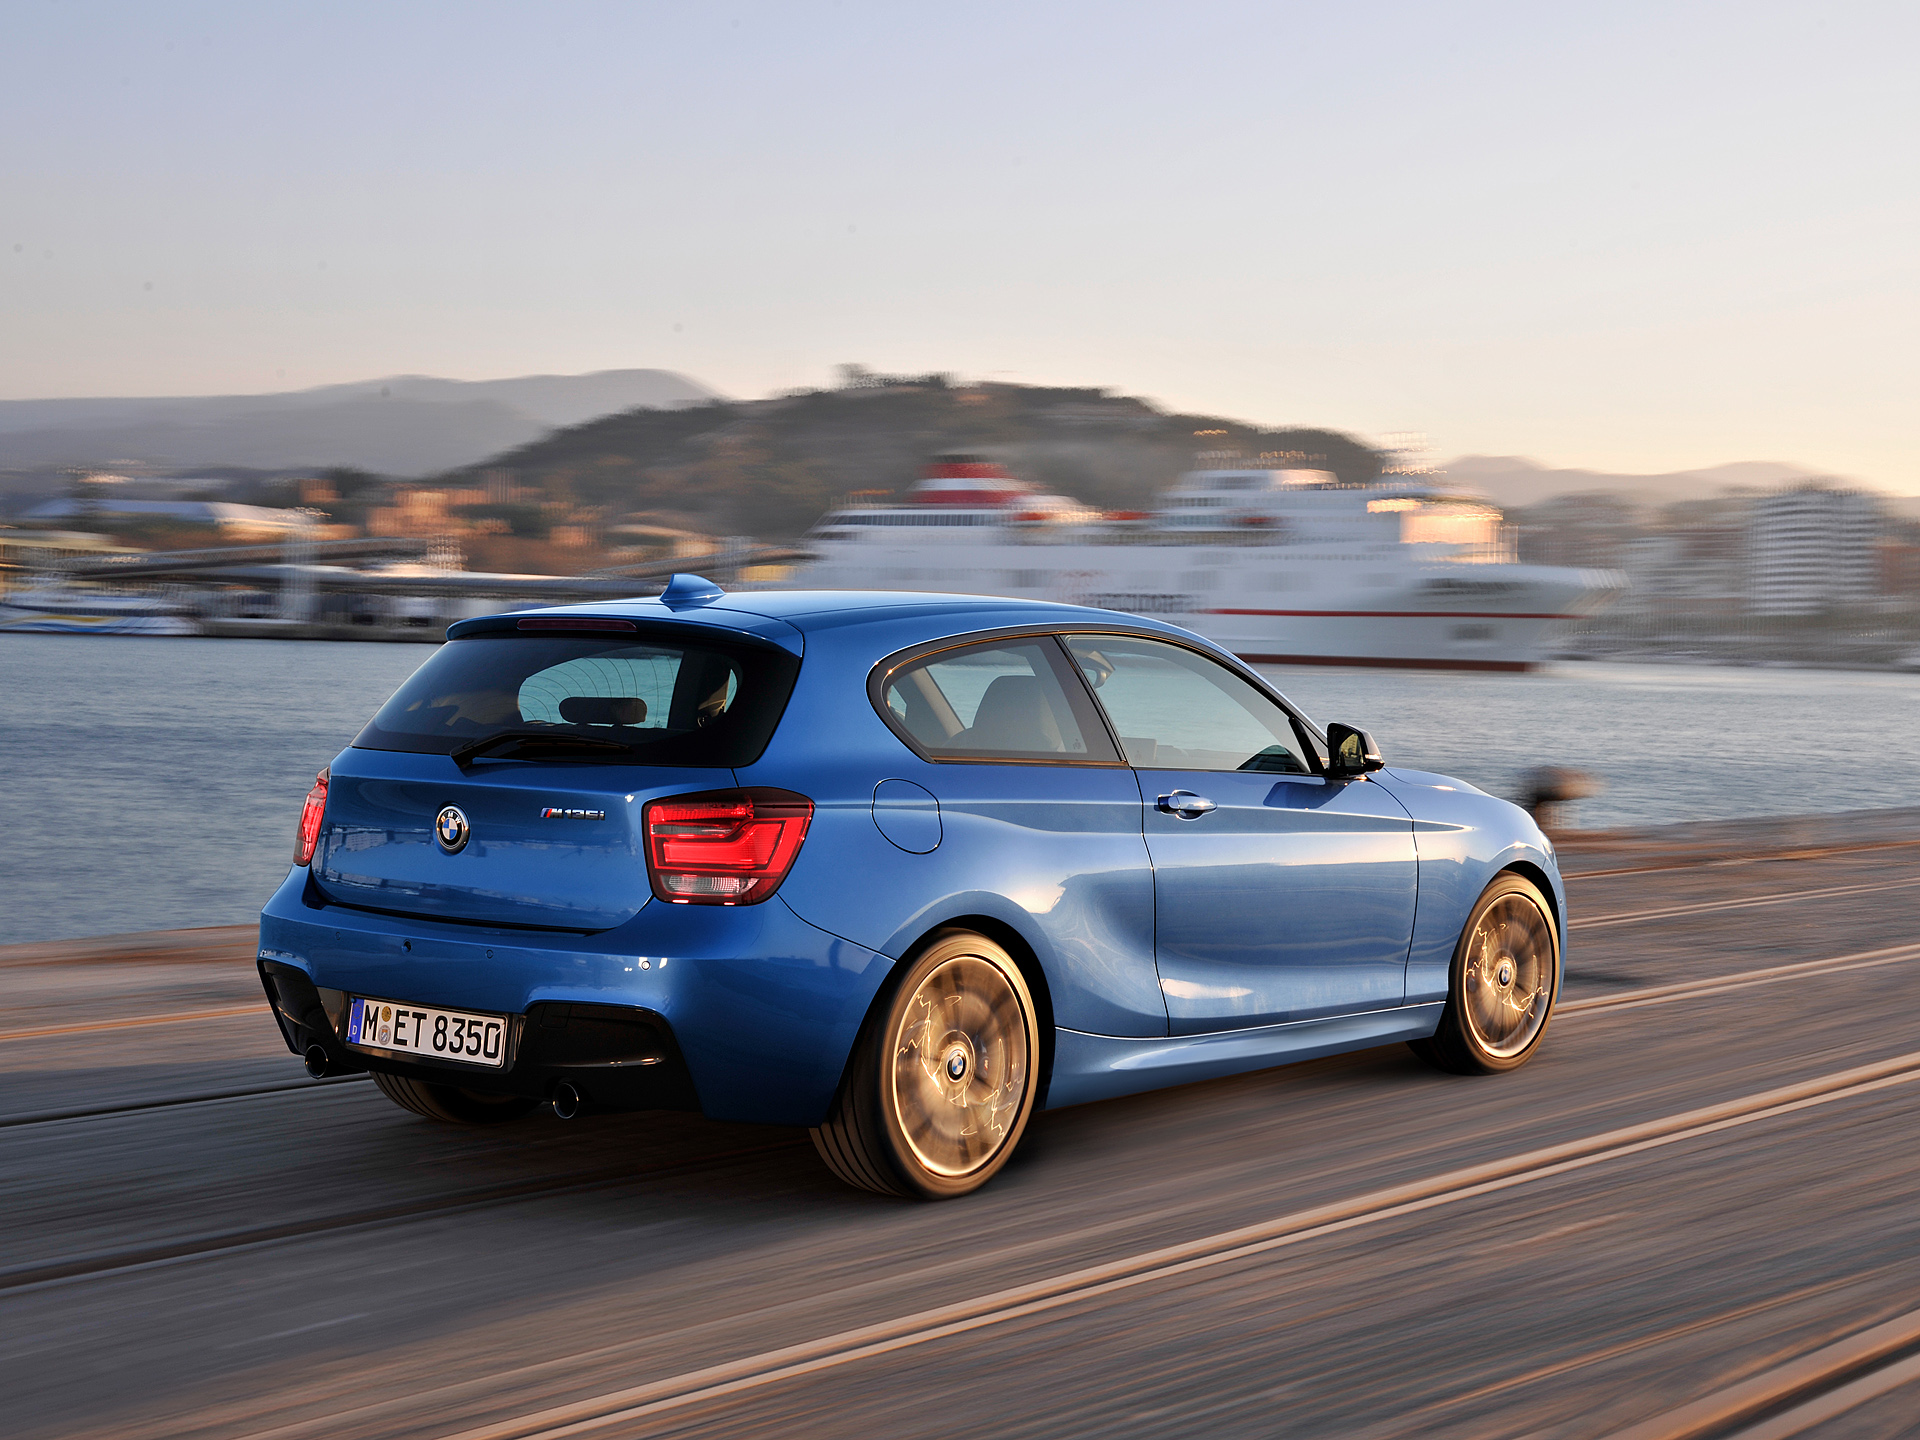 2012 Bmw Concept M135I Wallpapers